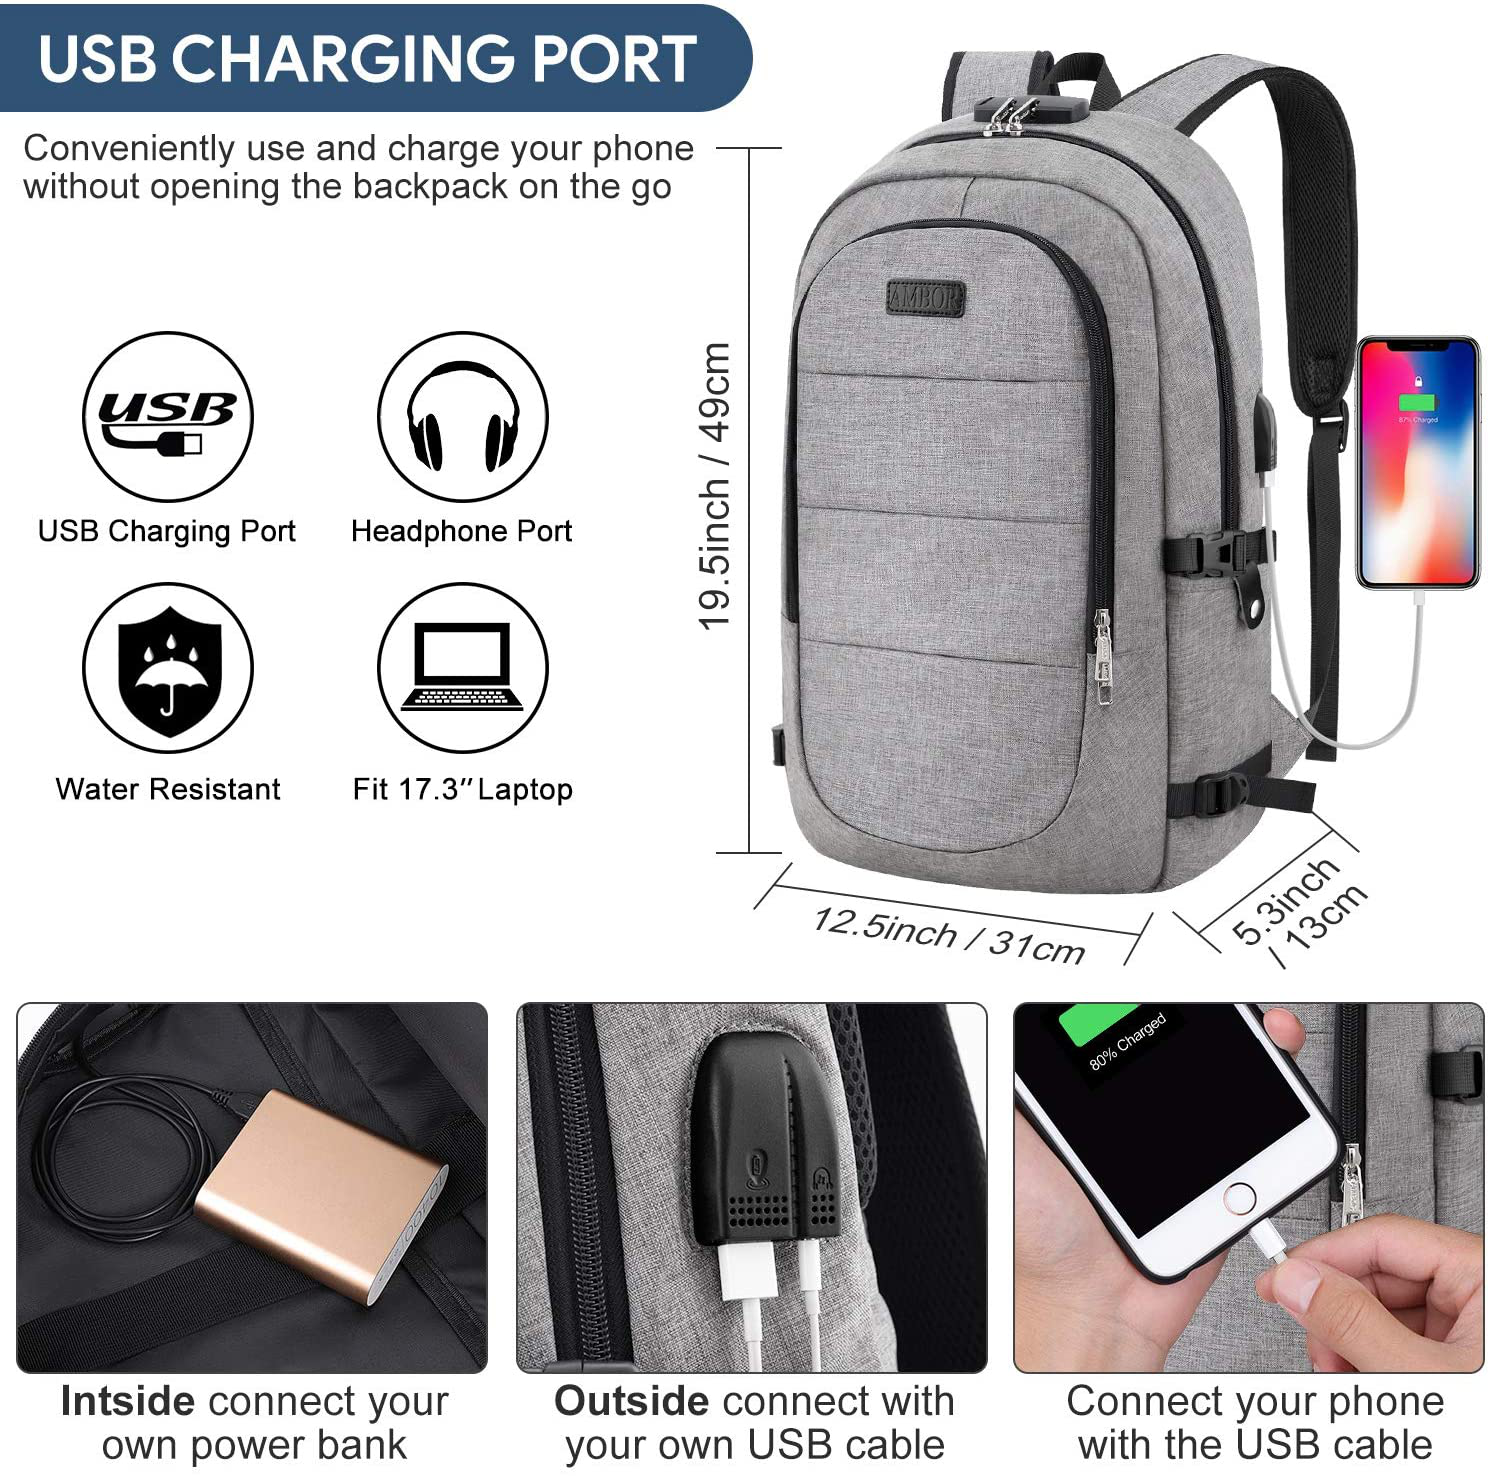 Laptop Backpack, 15.6-17.3 Inch College School Backpack for Men & Women AMBOR anti Theft Laptop Backpacks with USB Charging / Headphone Port, Business Travel Computer Bookbag Gifts Fits Notebook, Grey